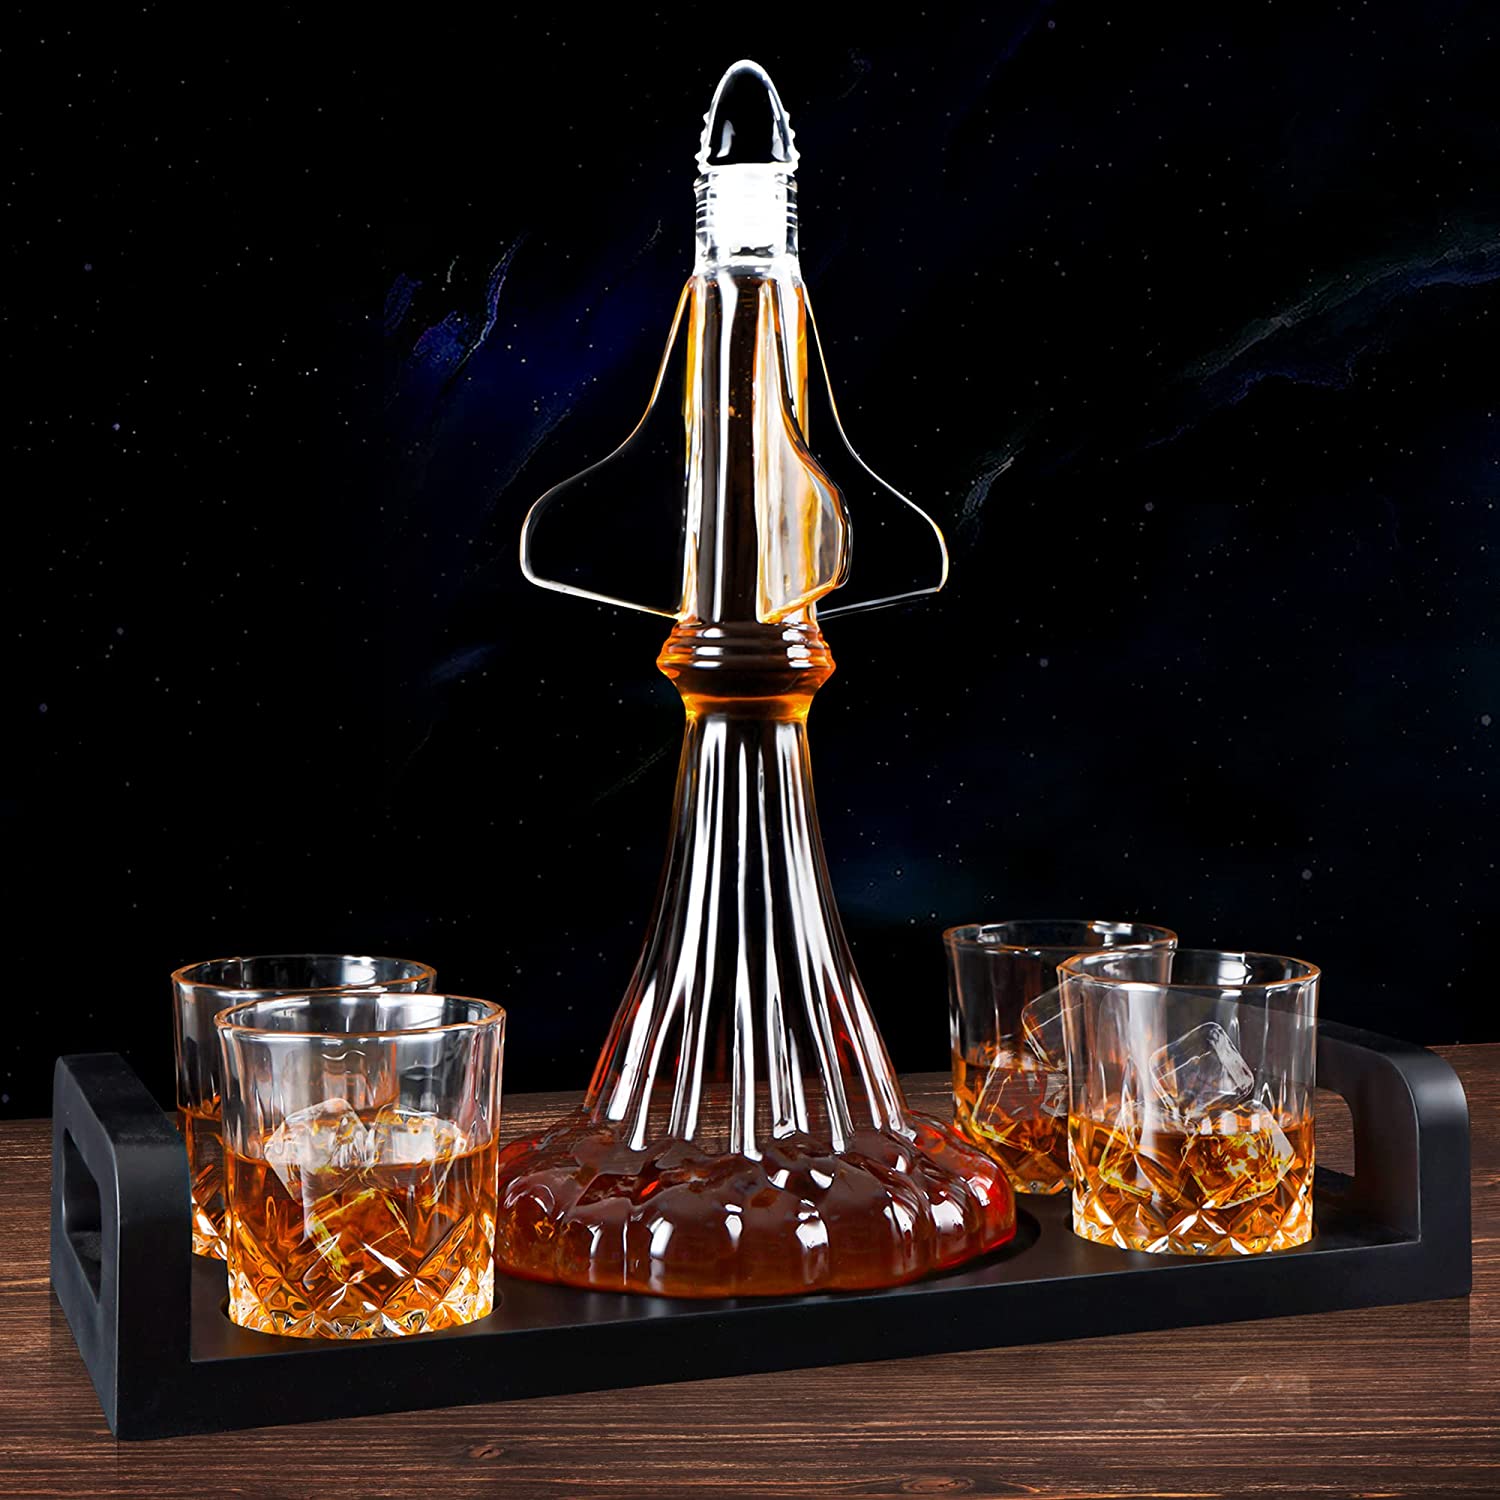 SuJolly Rocket Whiskey Decanter